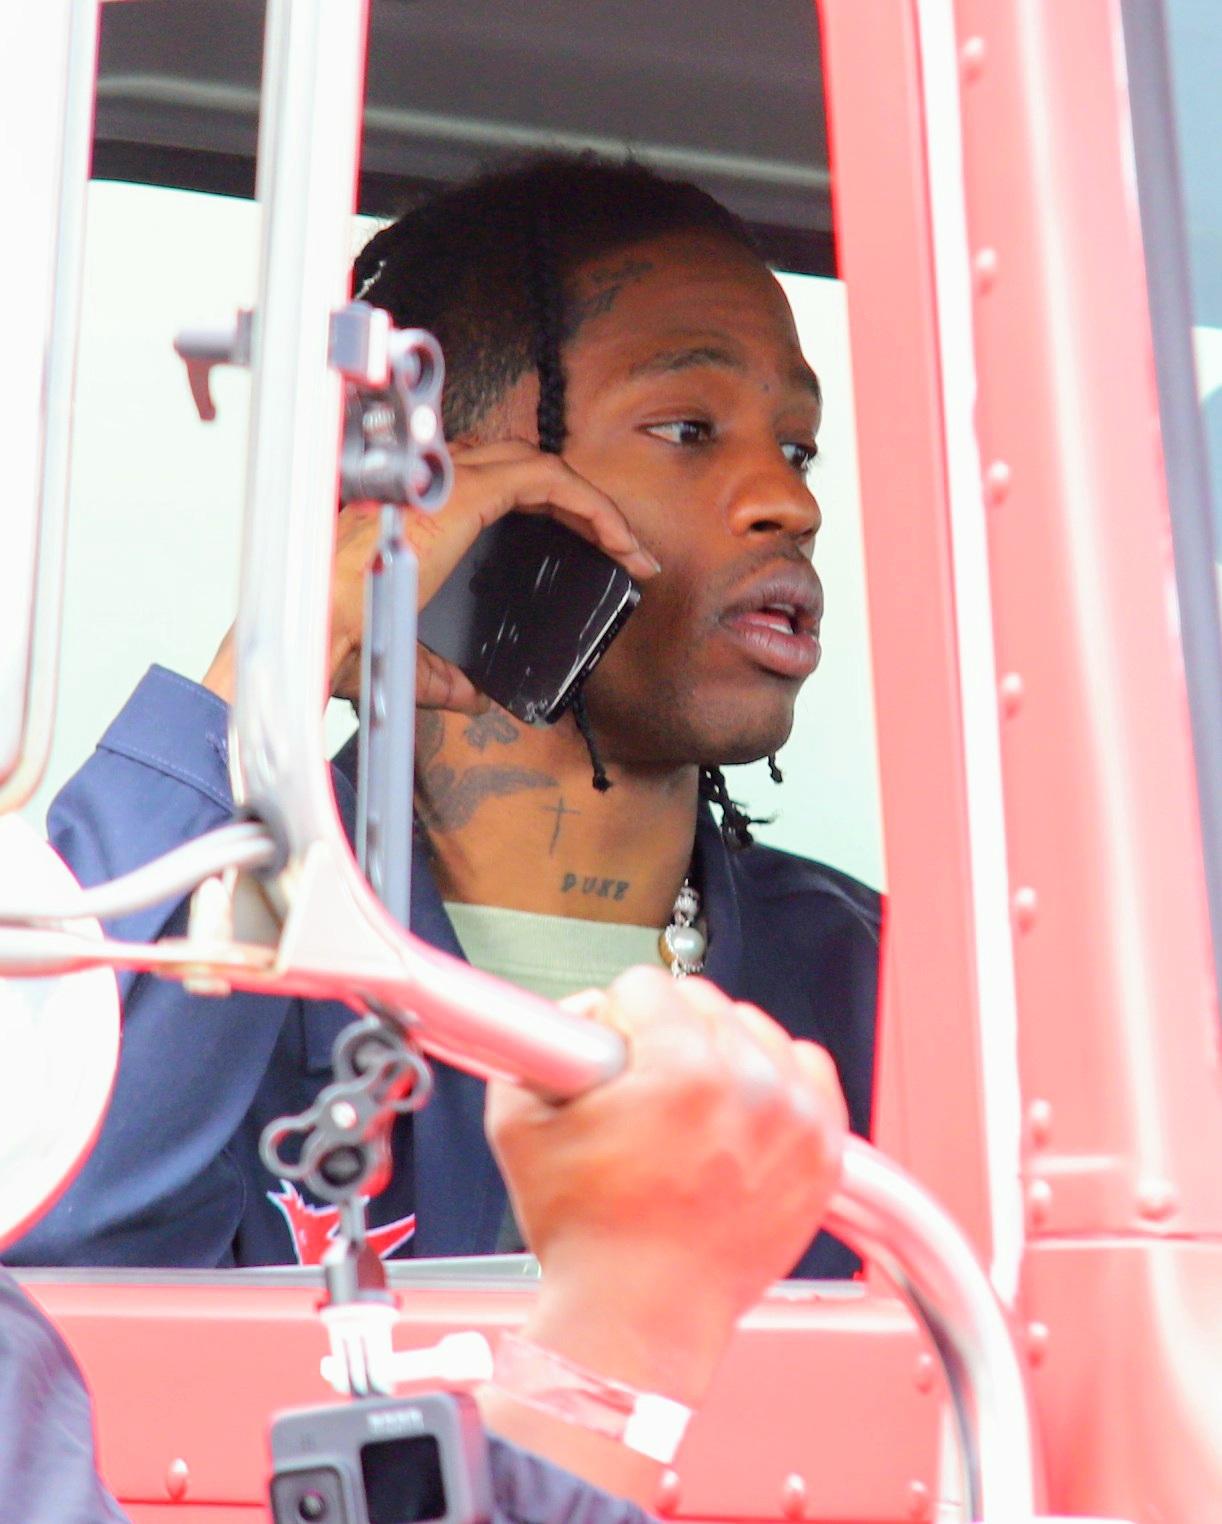 ‘Fortnite’ Removes Travis Scott From Game Following ‘Astroworld’ Tragedy